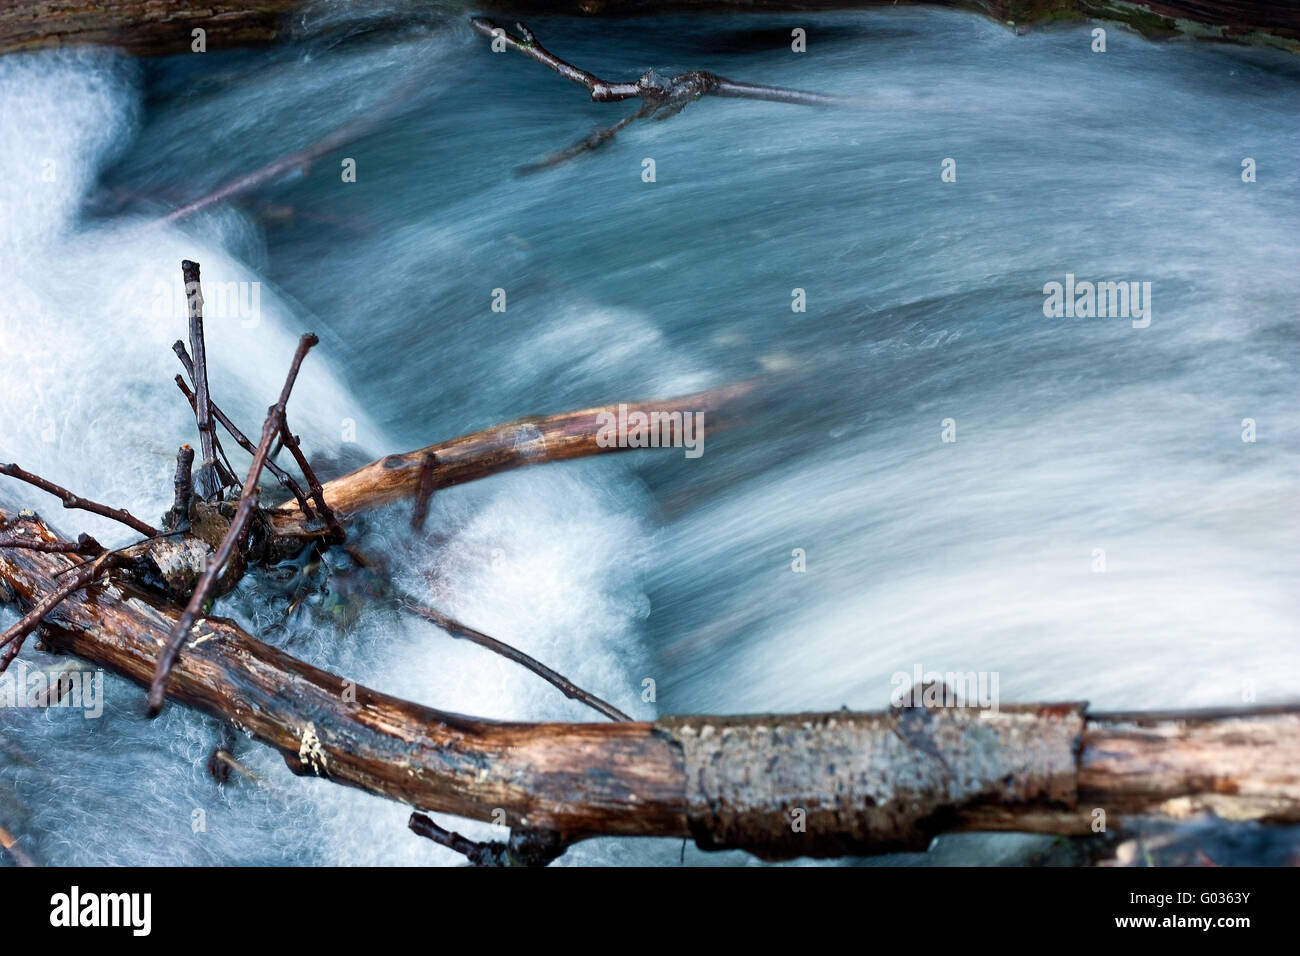 River passing branches Stock Photo